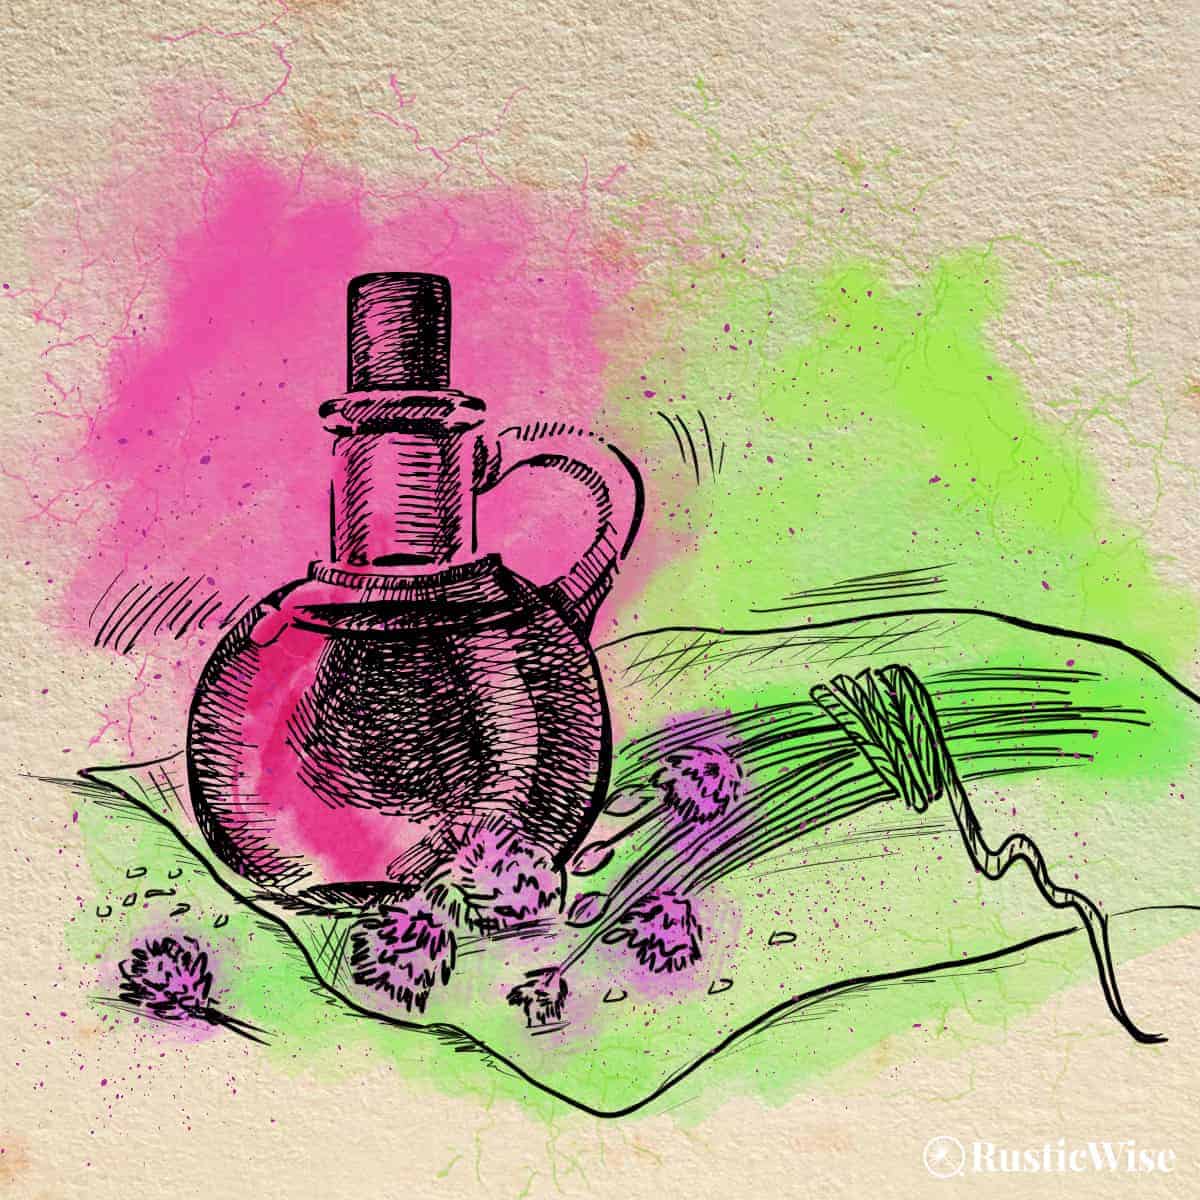 RusticWise, chive blossom vinegar recipe, illustration of chives and jar